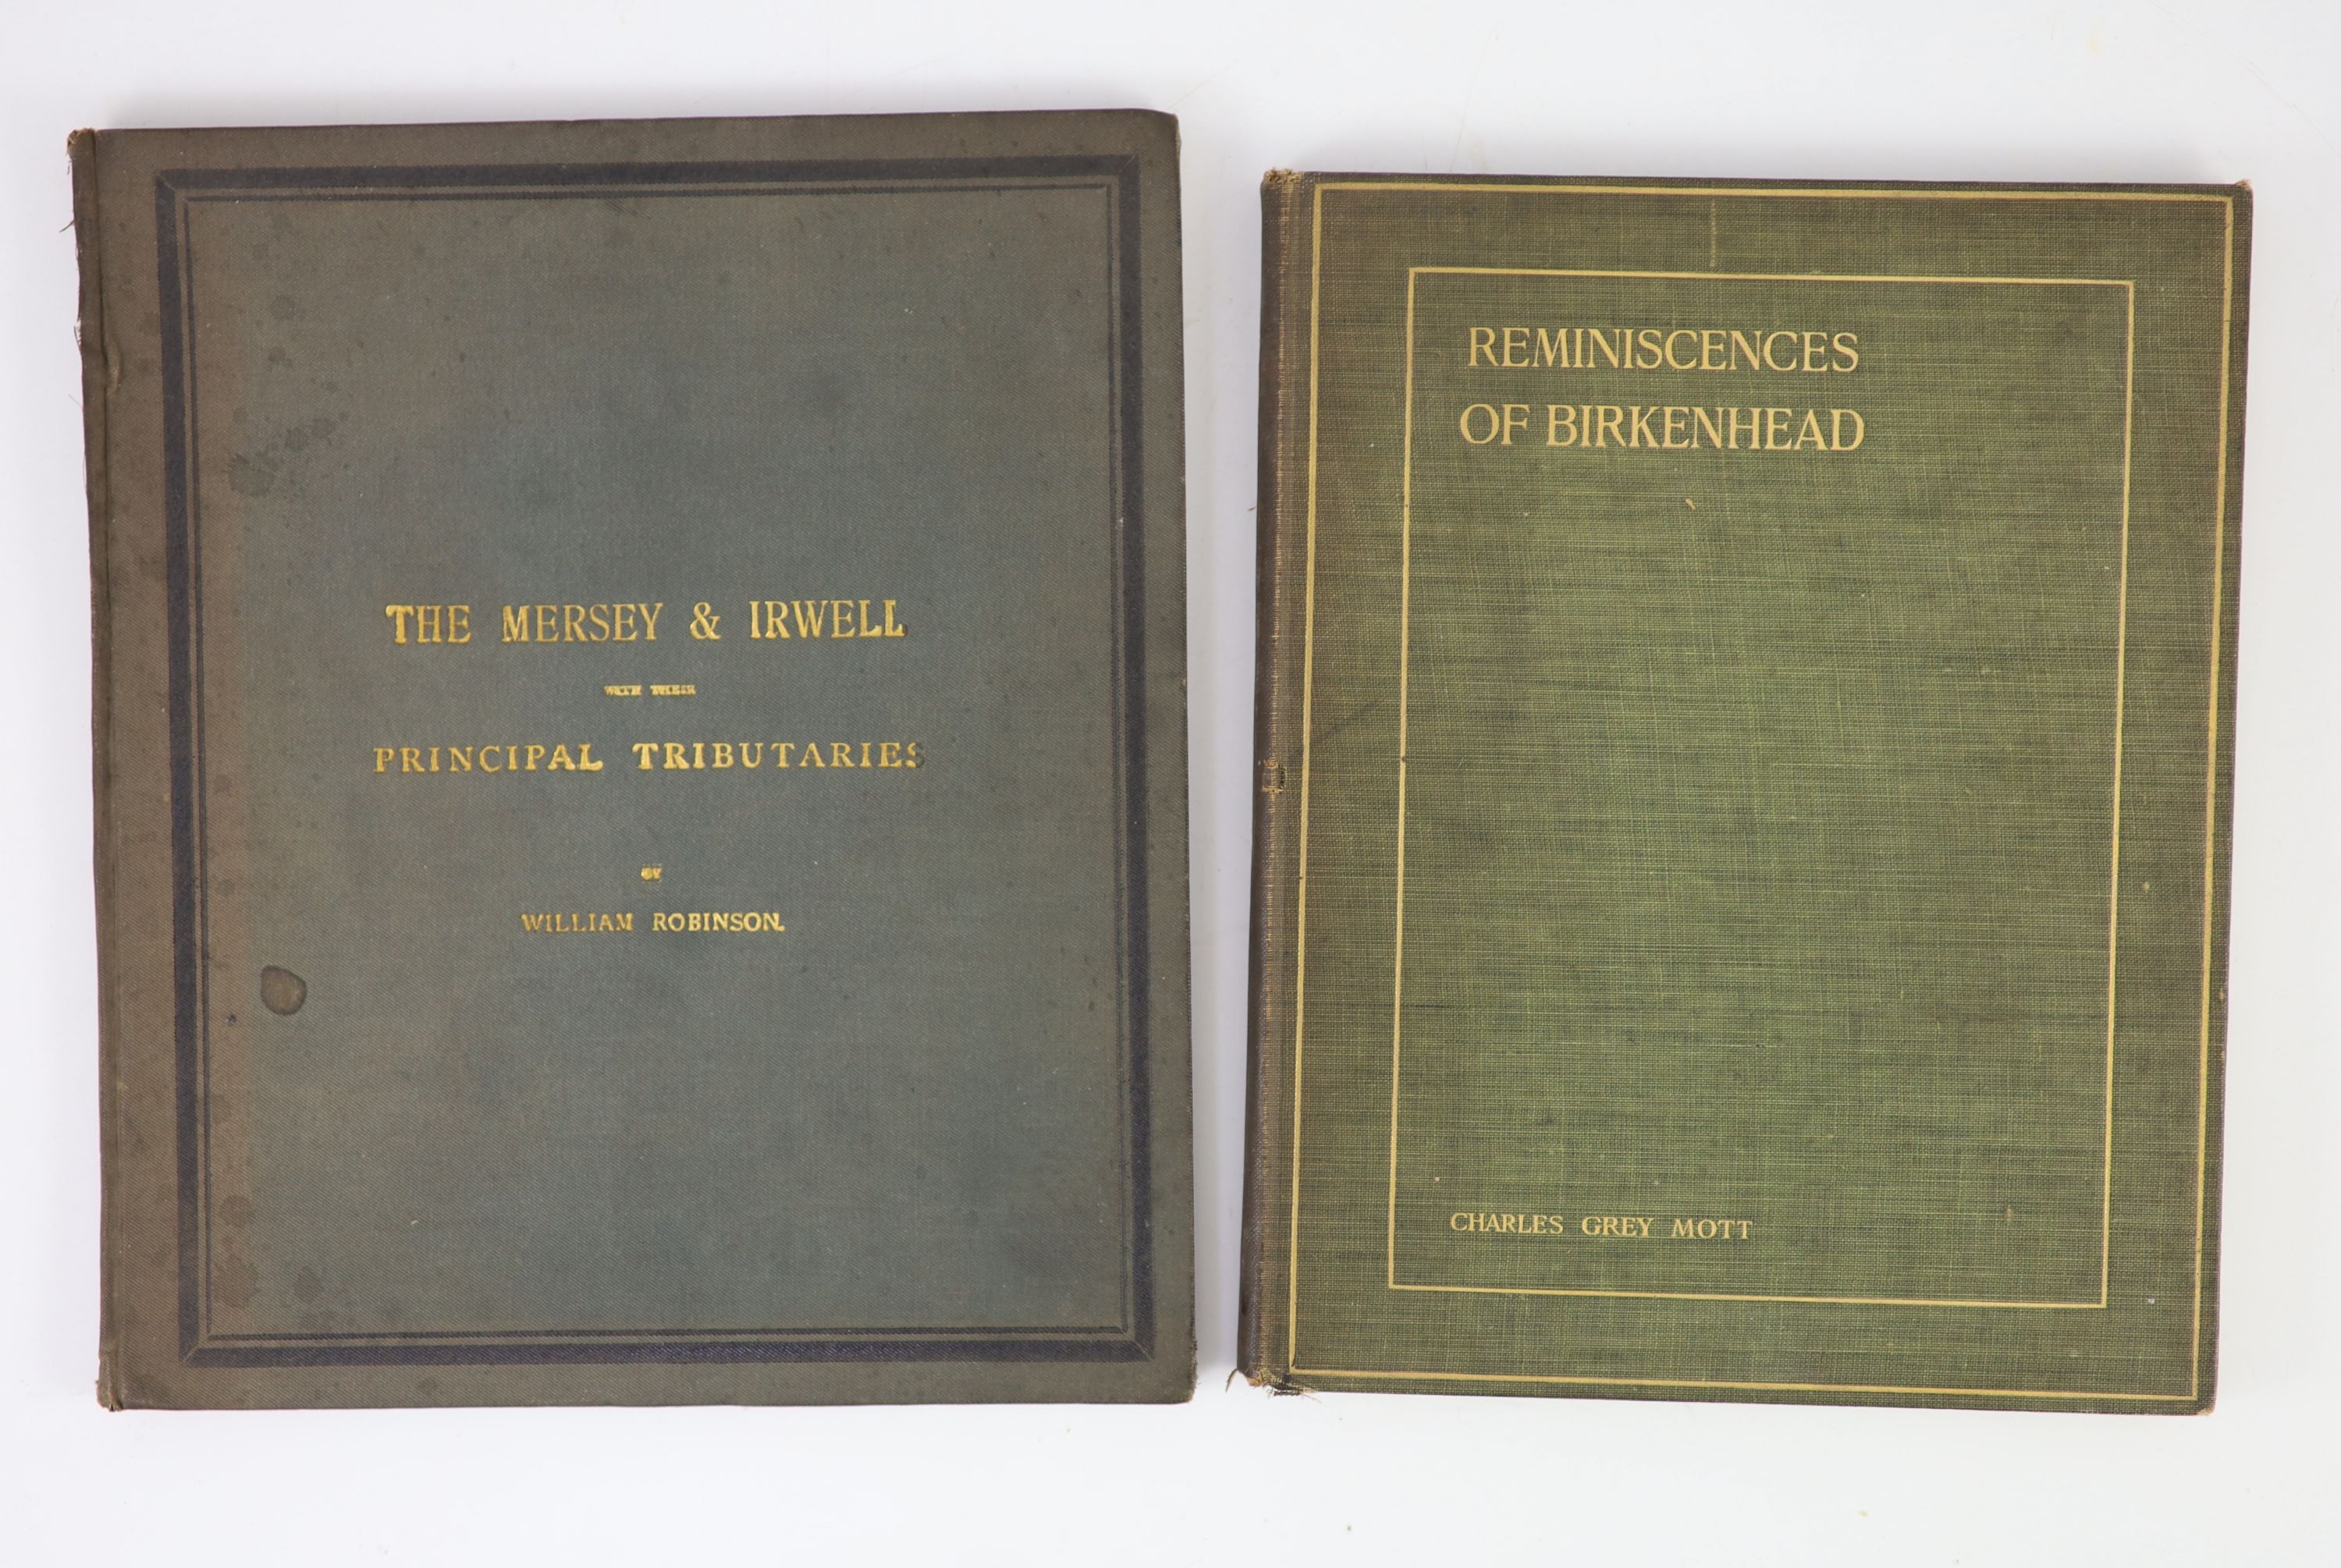 Robinson, William. The Mersey & Irwell with their Principal Tributaries. Manchester, small quarto, 1888. Lithographic title page and 25 leaves containing 27 lithographic plates, followed by 20 pages of text. Original clo